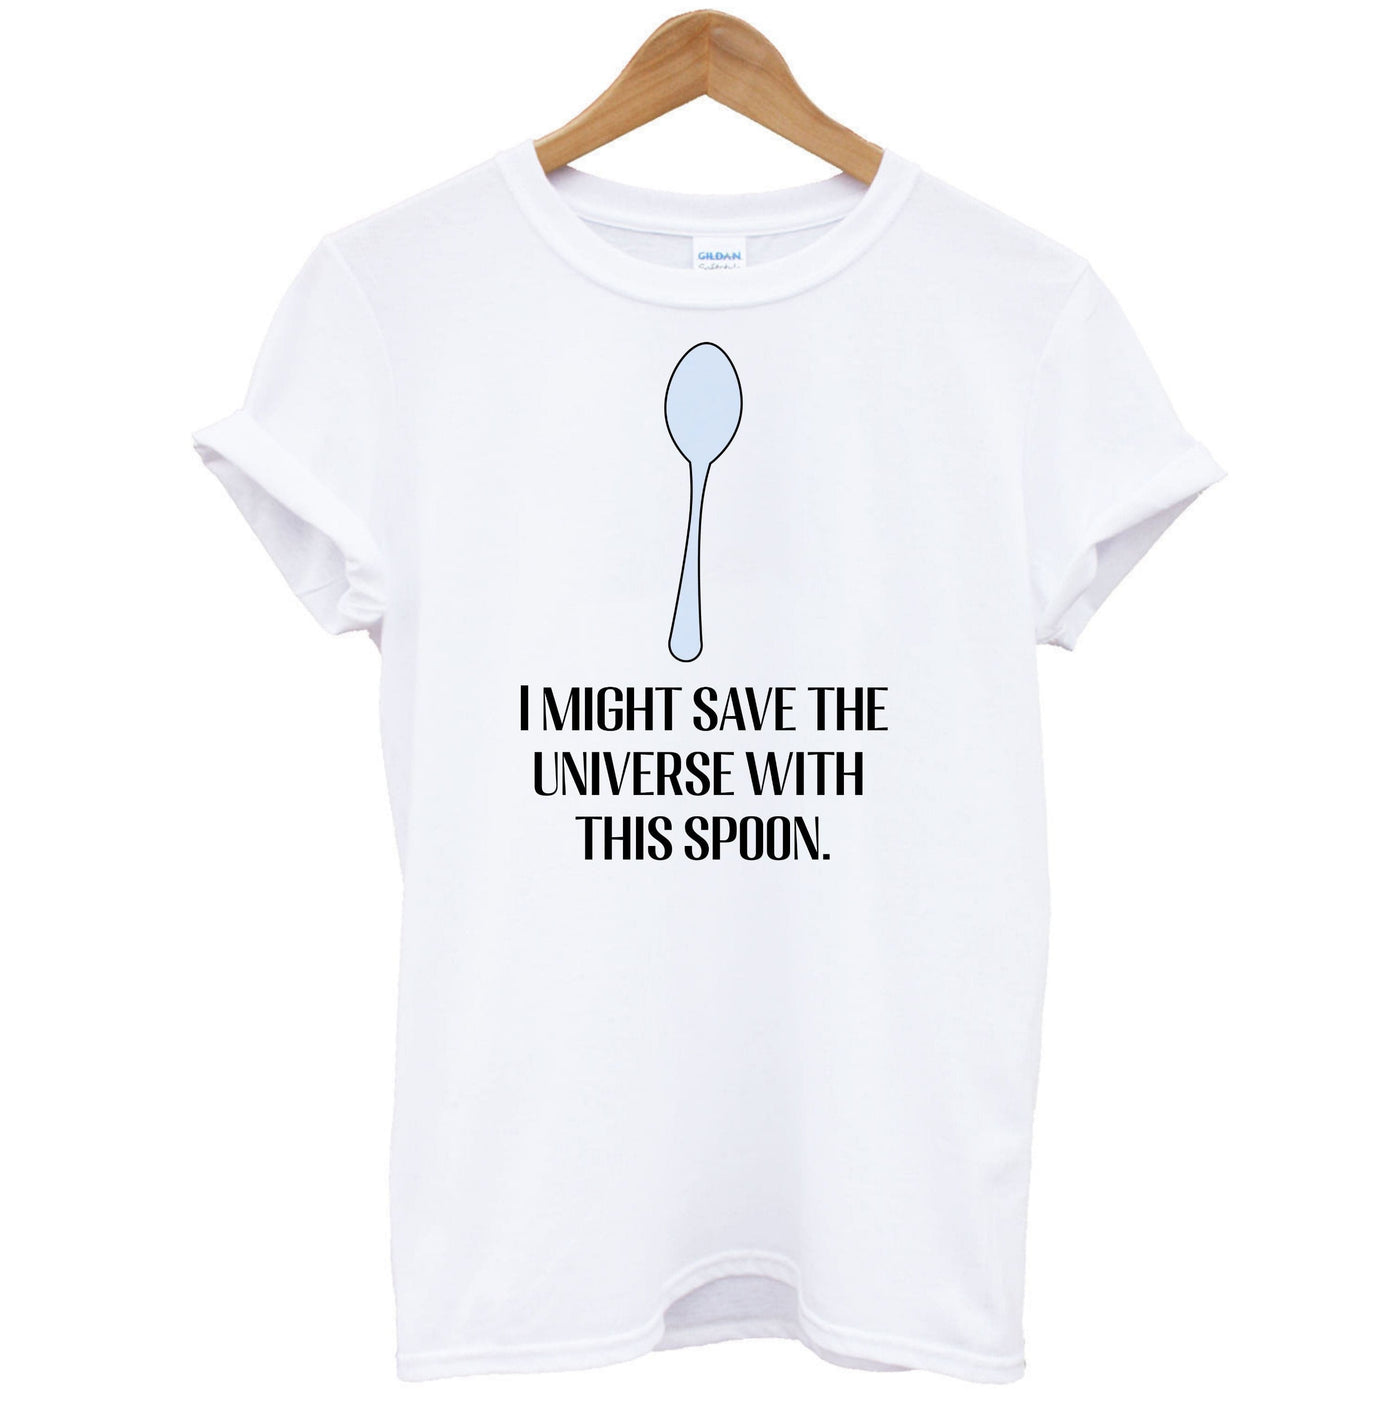 The Spoon - Doctor Who T-Shirt